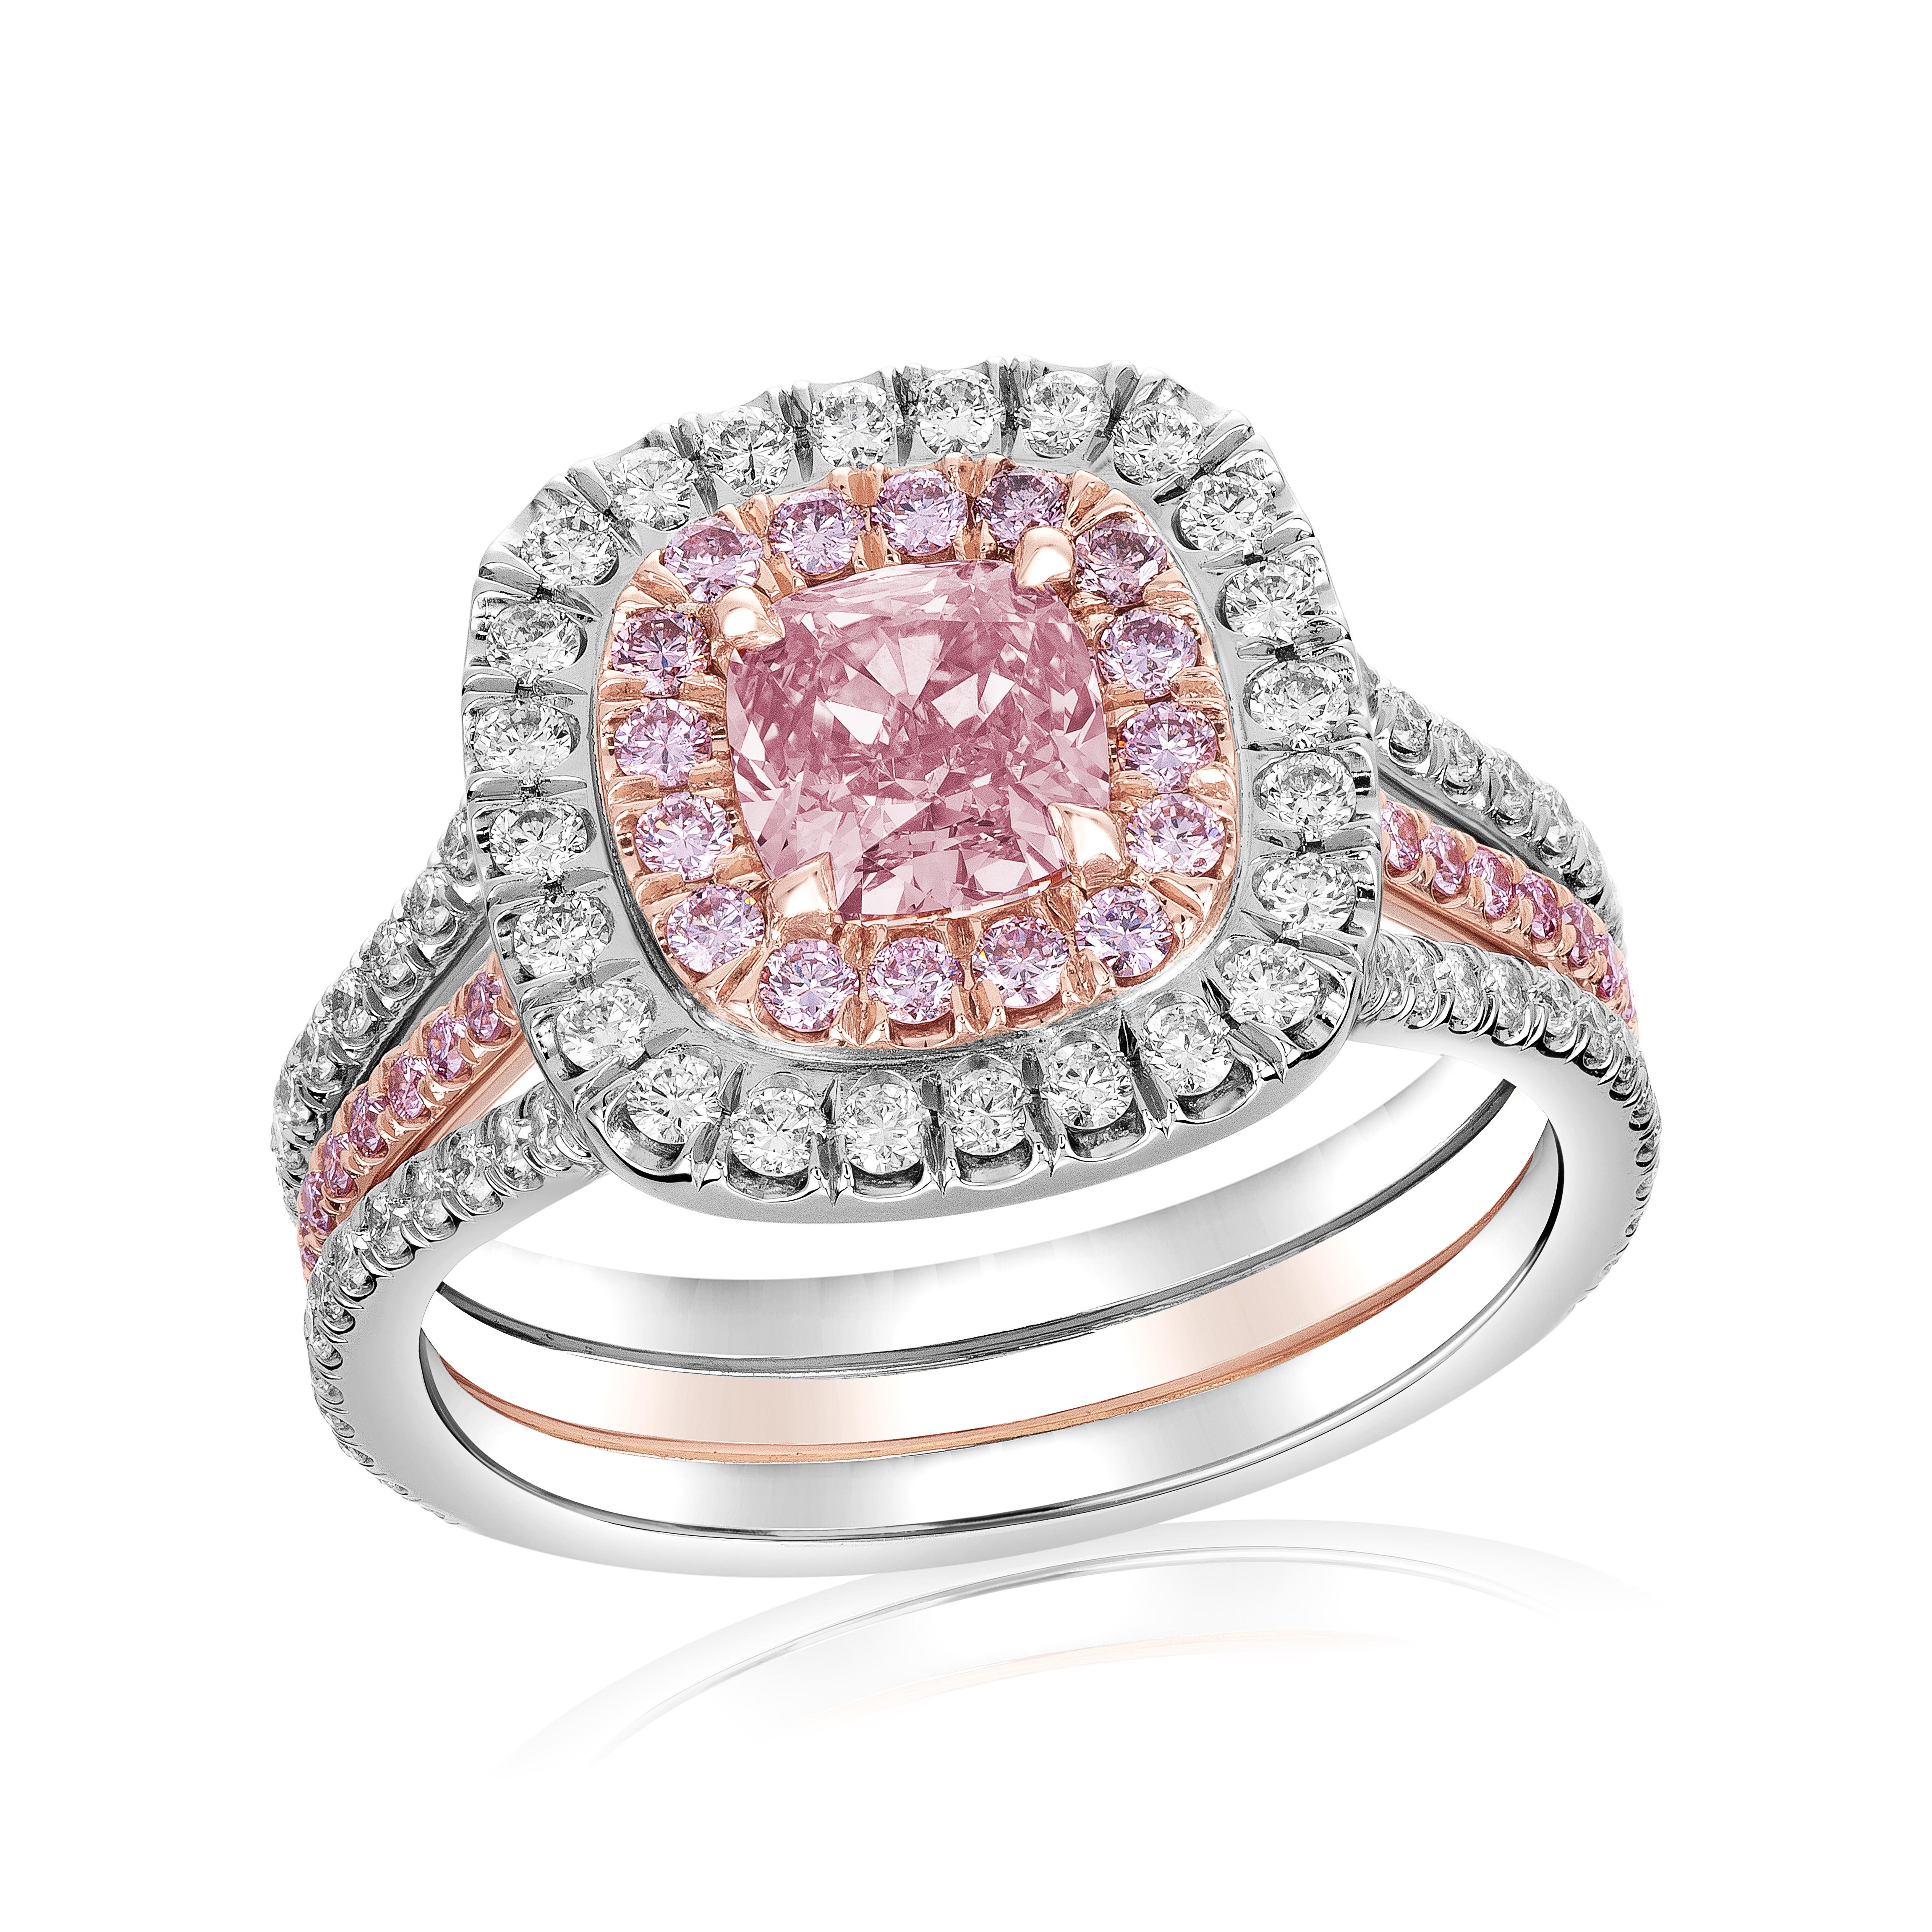 Indulge in the extraordinary beauty of our handmade platinum ring, featuring a magnificent 0.75-carat fancy pink cushion diamond with SI1 clarity. Certified by GIA with the reference number 1176671785, this precious gem exudes elegance and charm.